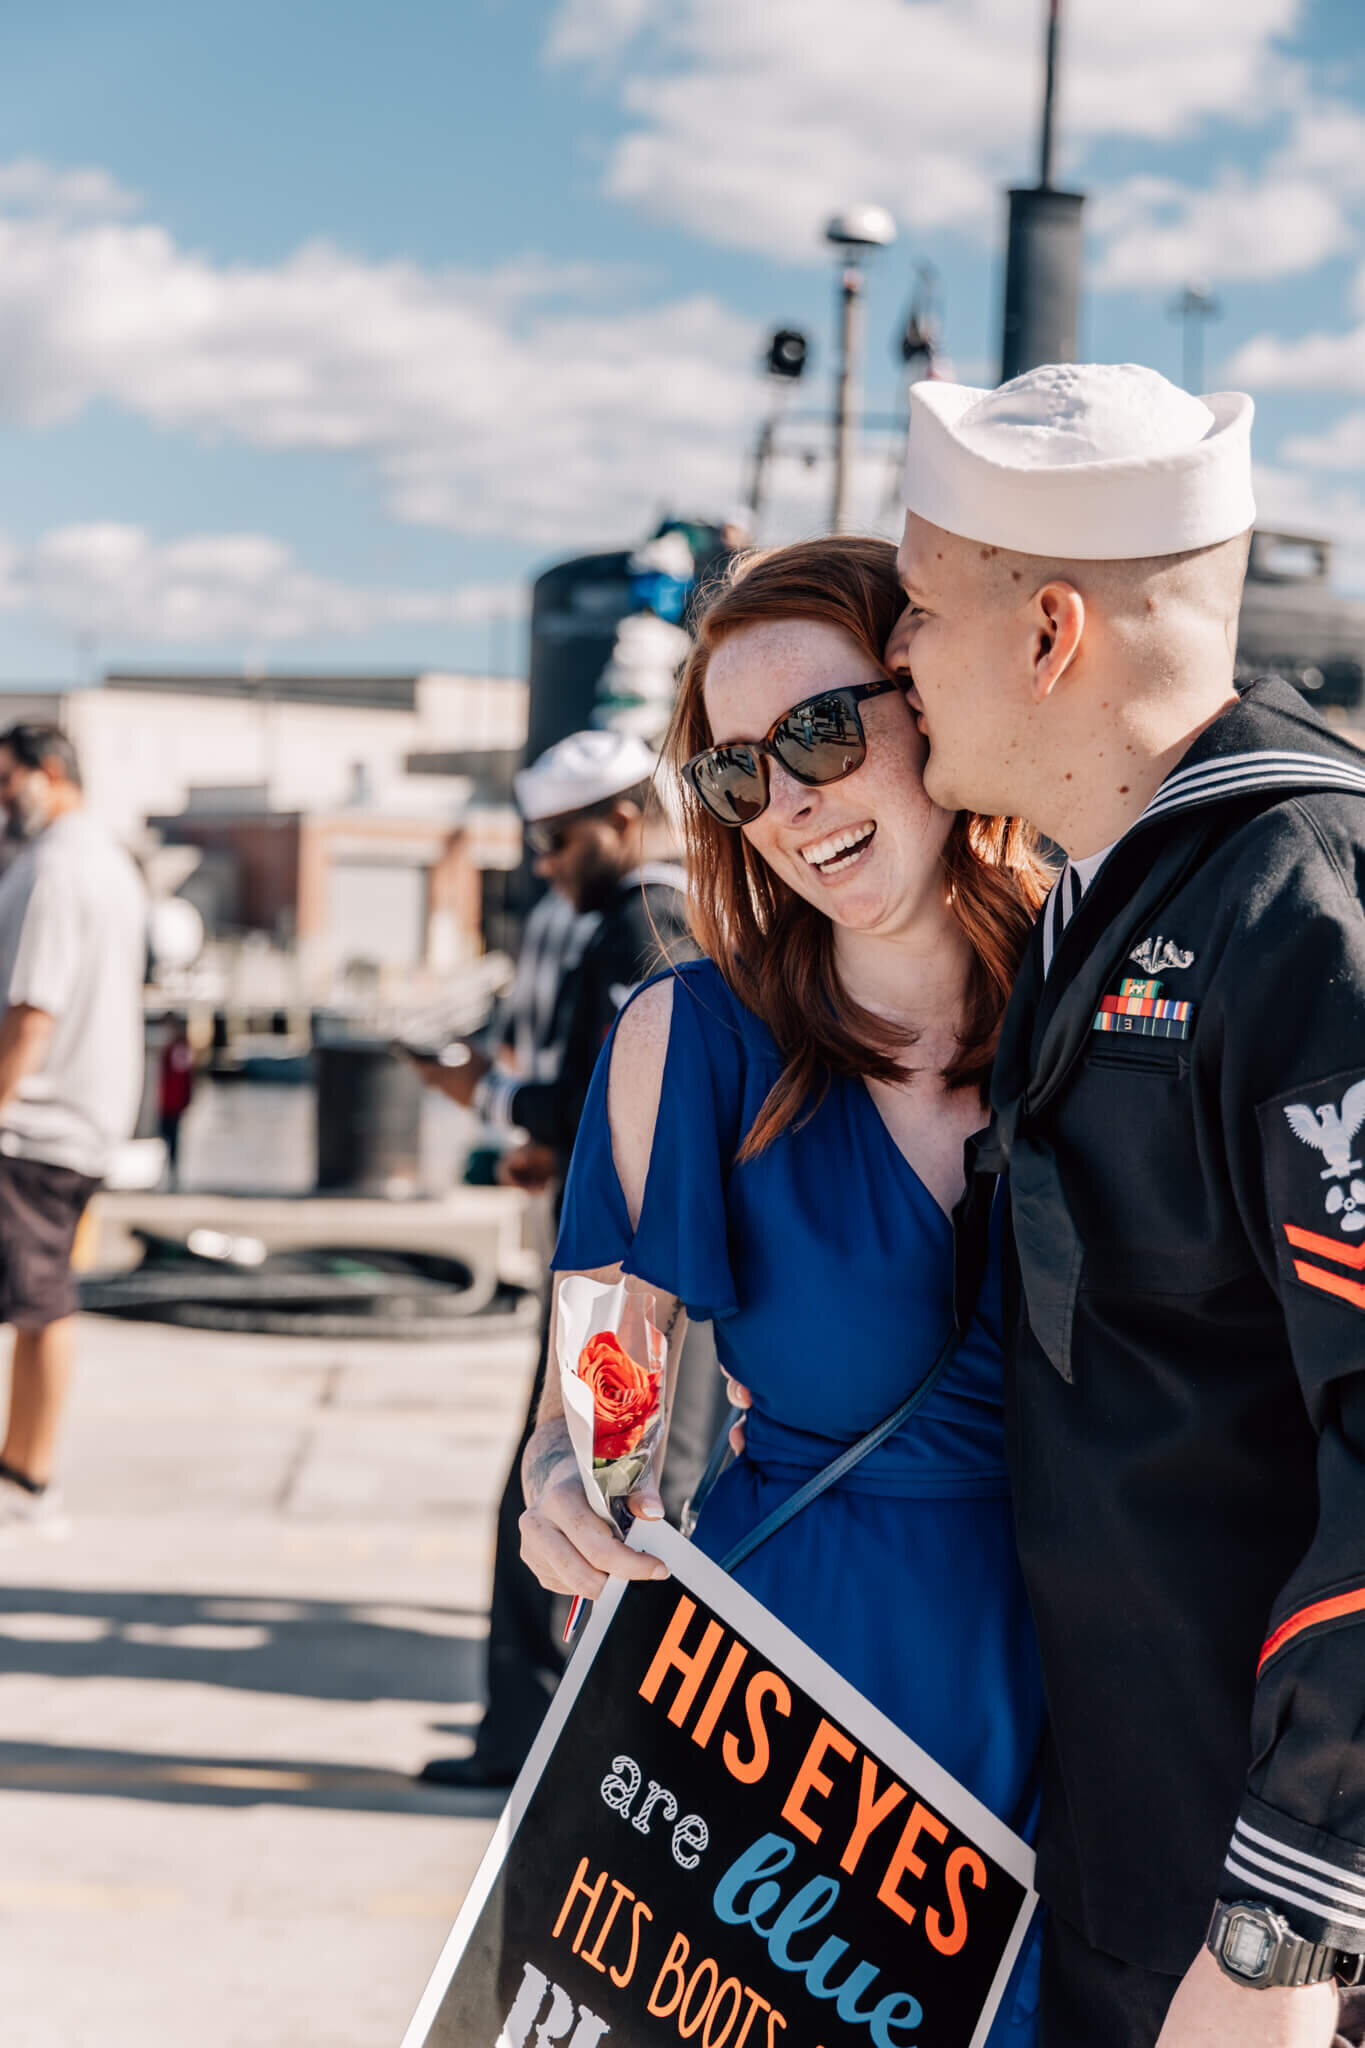 Petty officer second class kisses new fiance after proposing on the pier after returning from a deployment aboard the USS Montpelier.